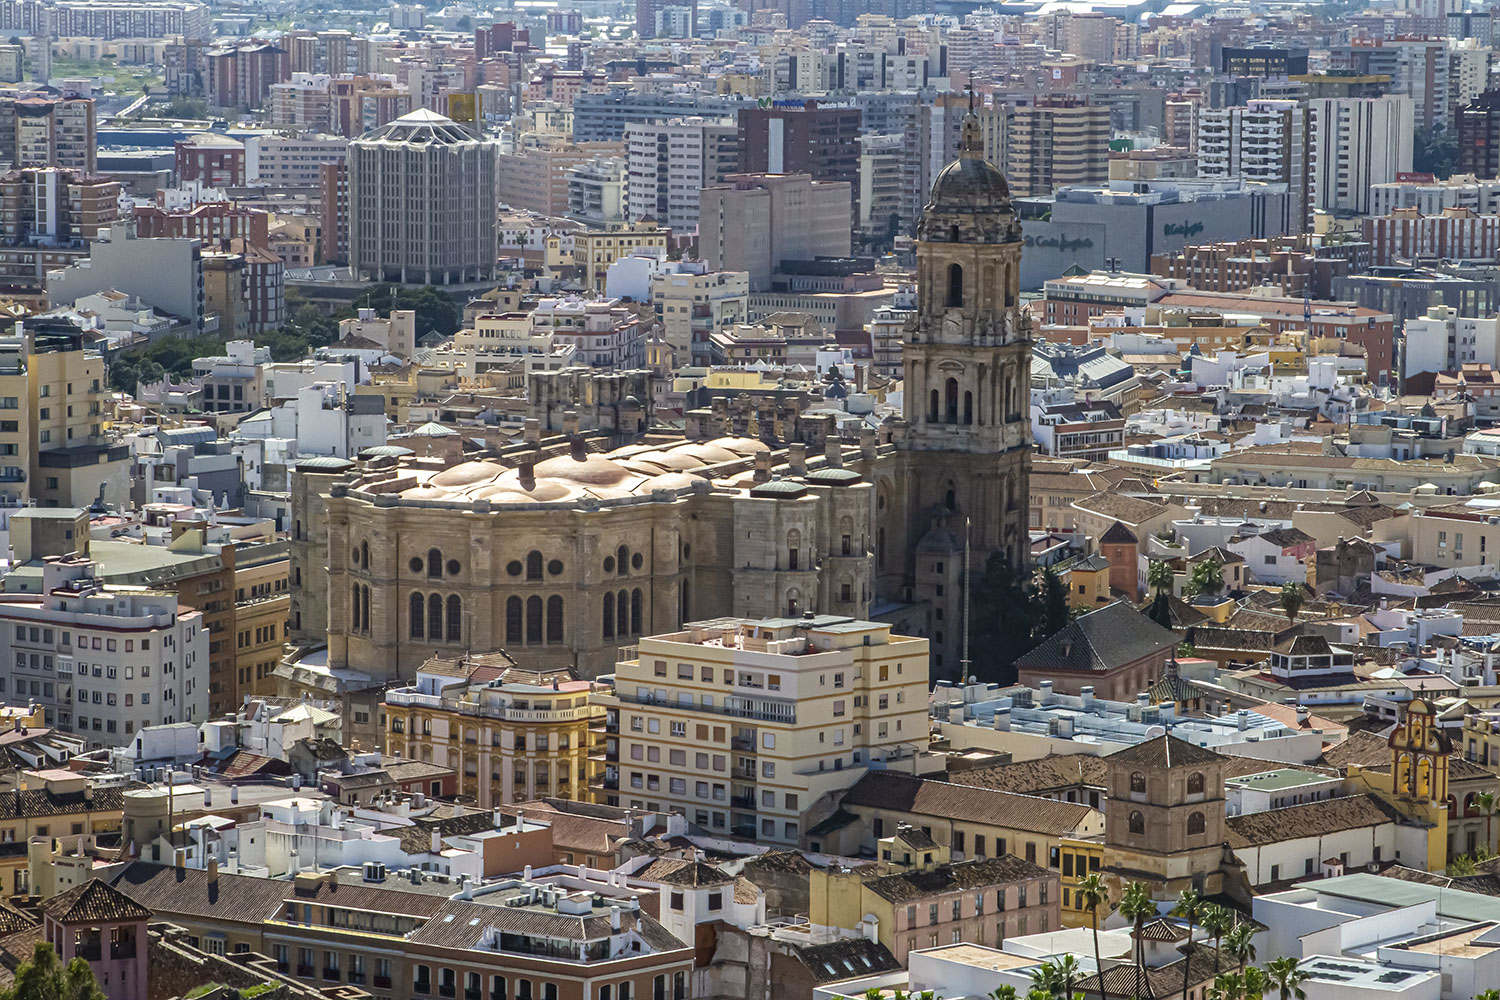 Spain, Cathederal in Malaga, taken from the footpath to Monte Gibralfaro.